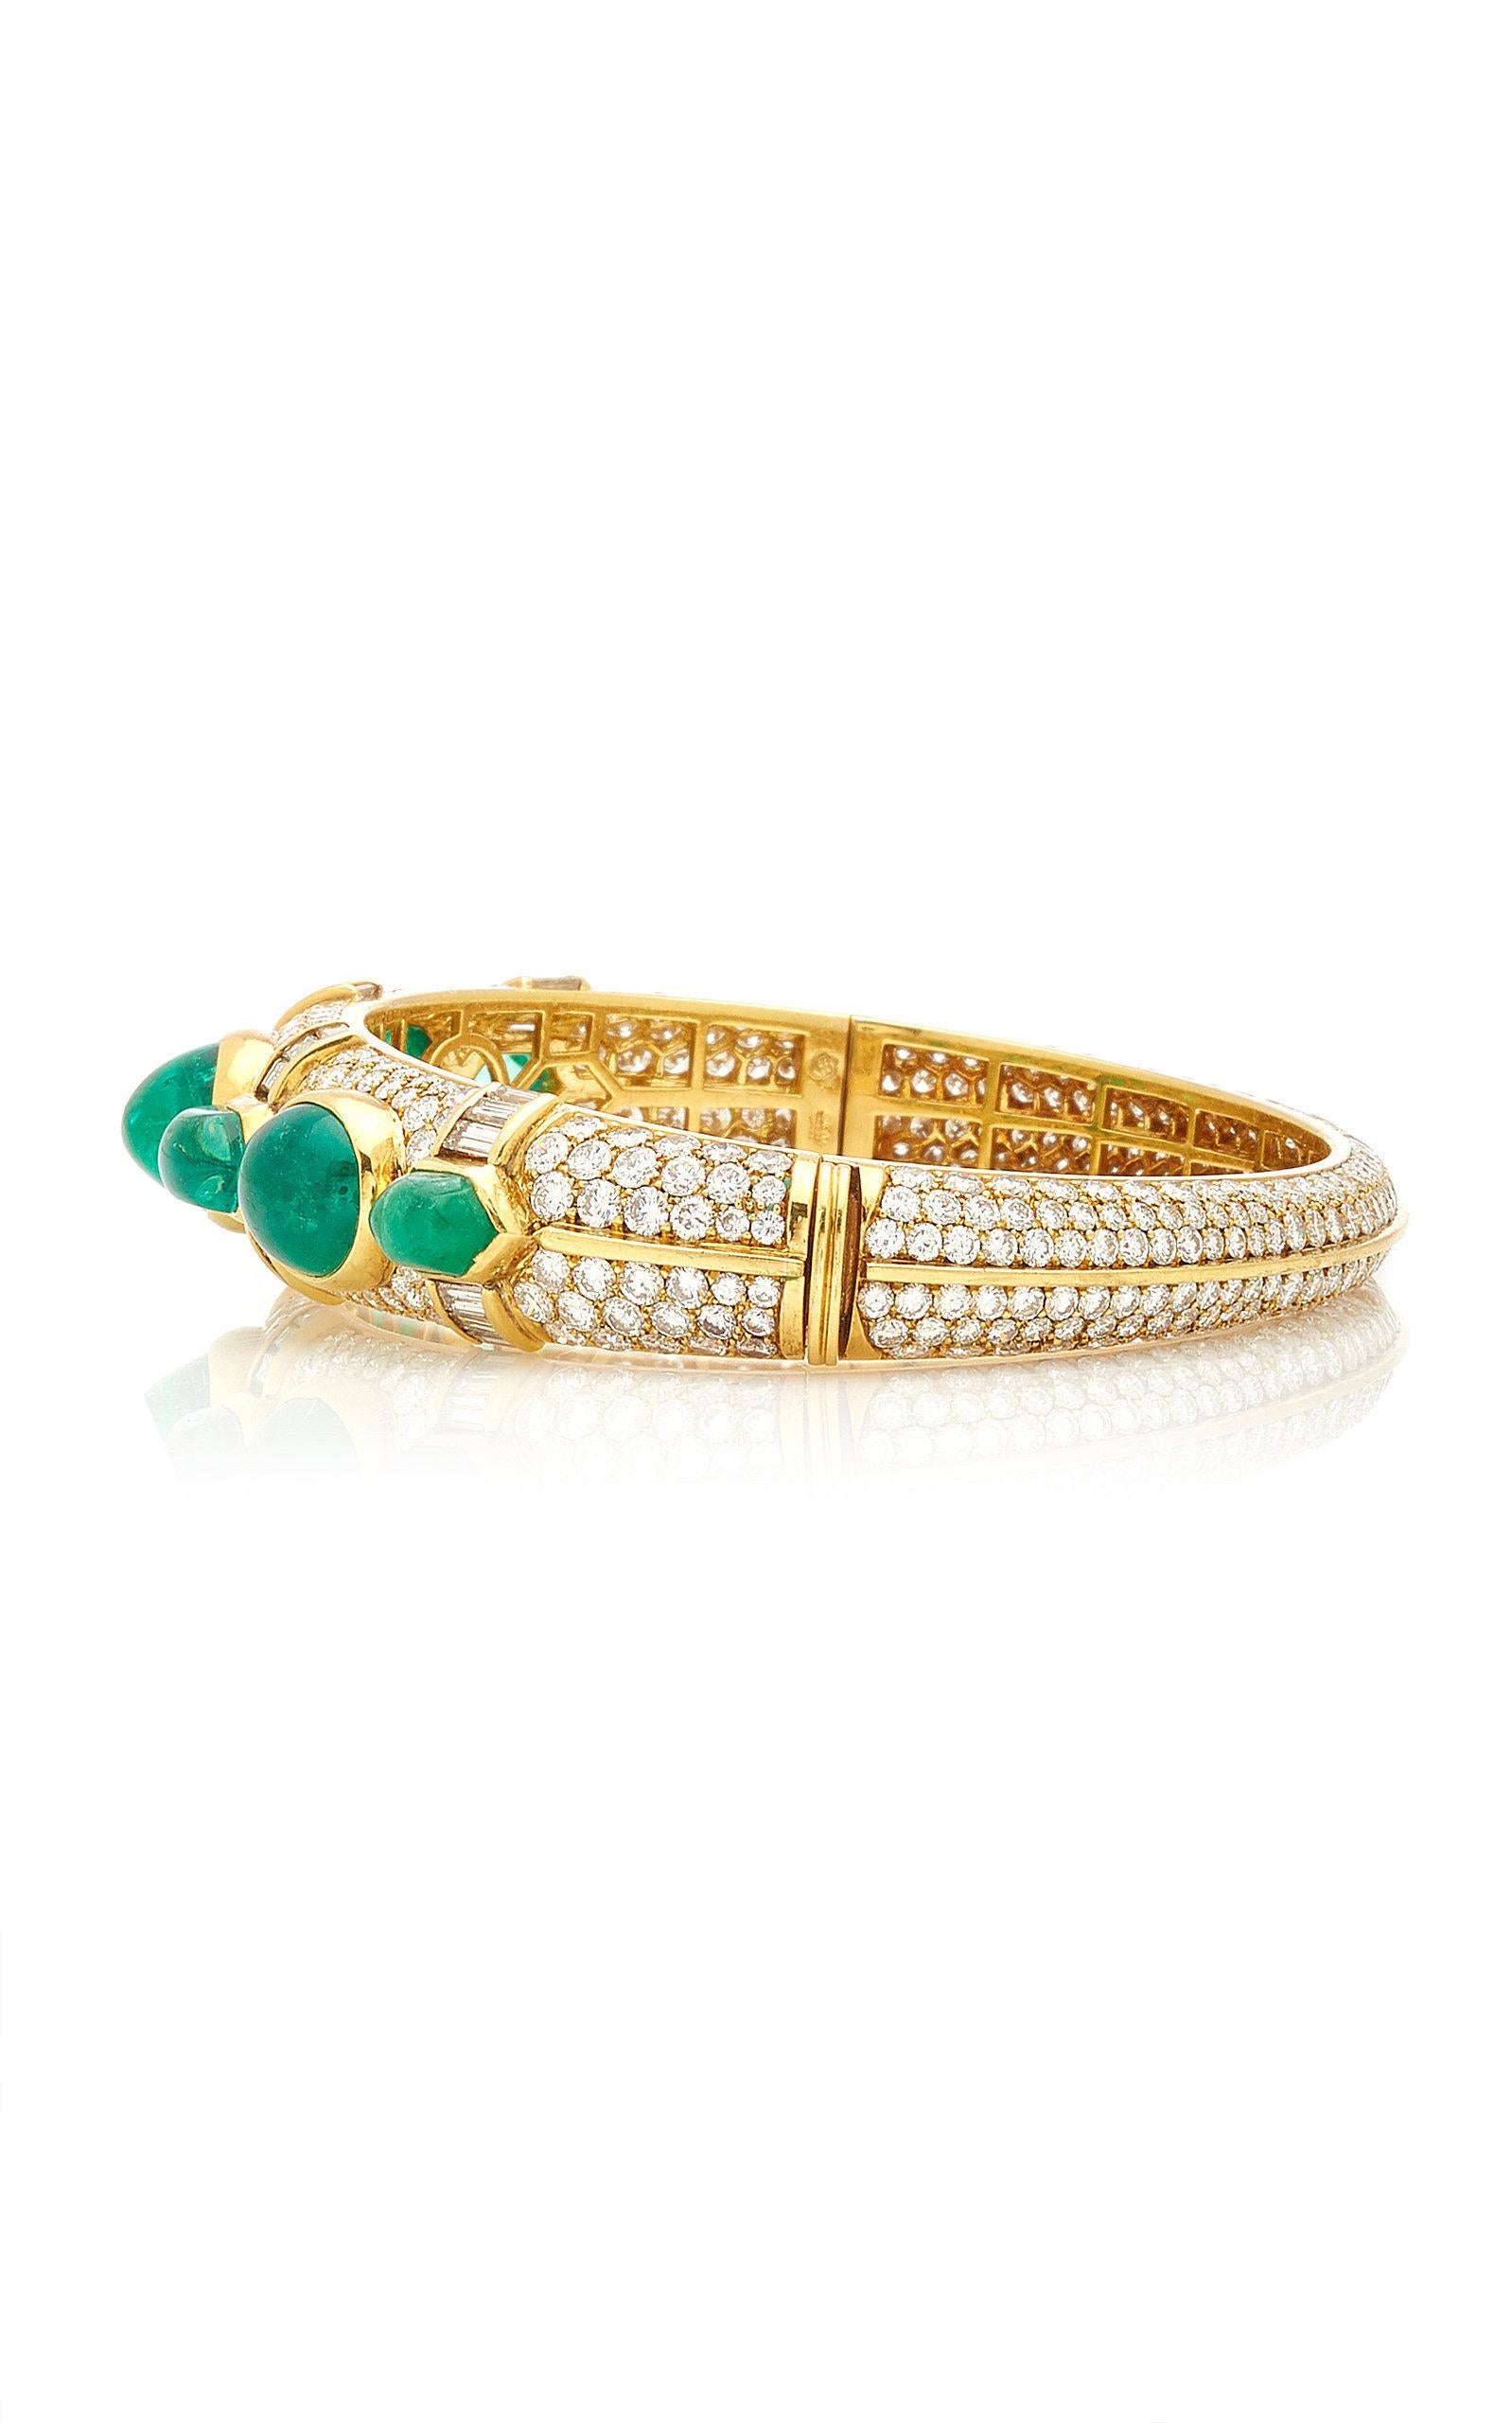 A beautiful bangle bracelet manufactured by Bulgari, presenting approximately 25 carats of fine quality cabochon emeralds and 18 carats of brilliant and baguette cut diamonds, on a fine 18kt yellow gold mounting. Made in Italy, circa 1965